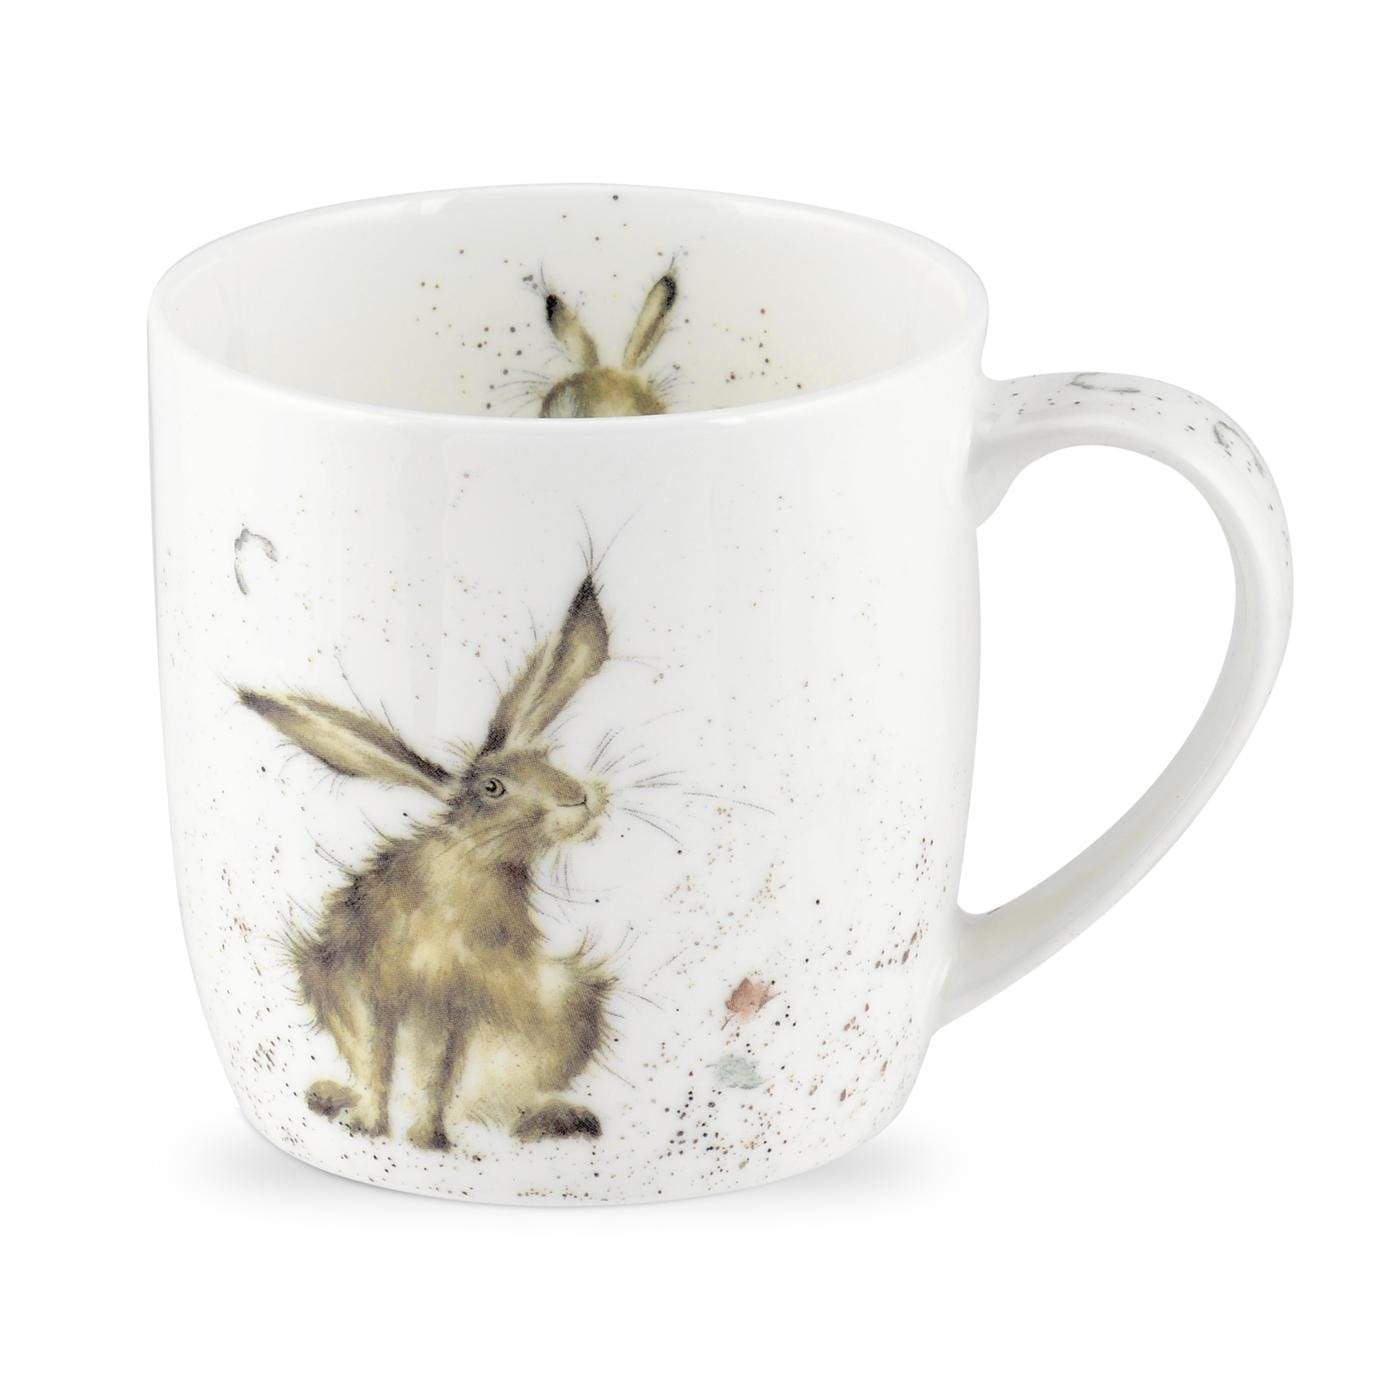 Wrendale Designs Mugs & Drinkware Good Hare Day Country Animal Illustrated Mugs - Choice of designs